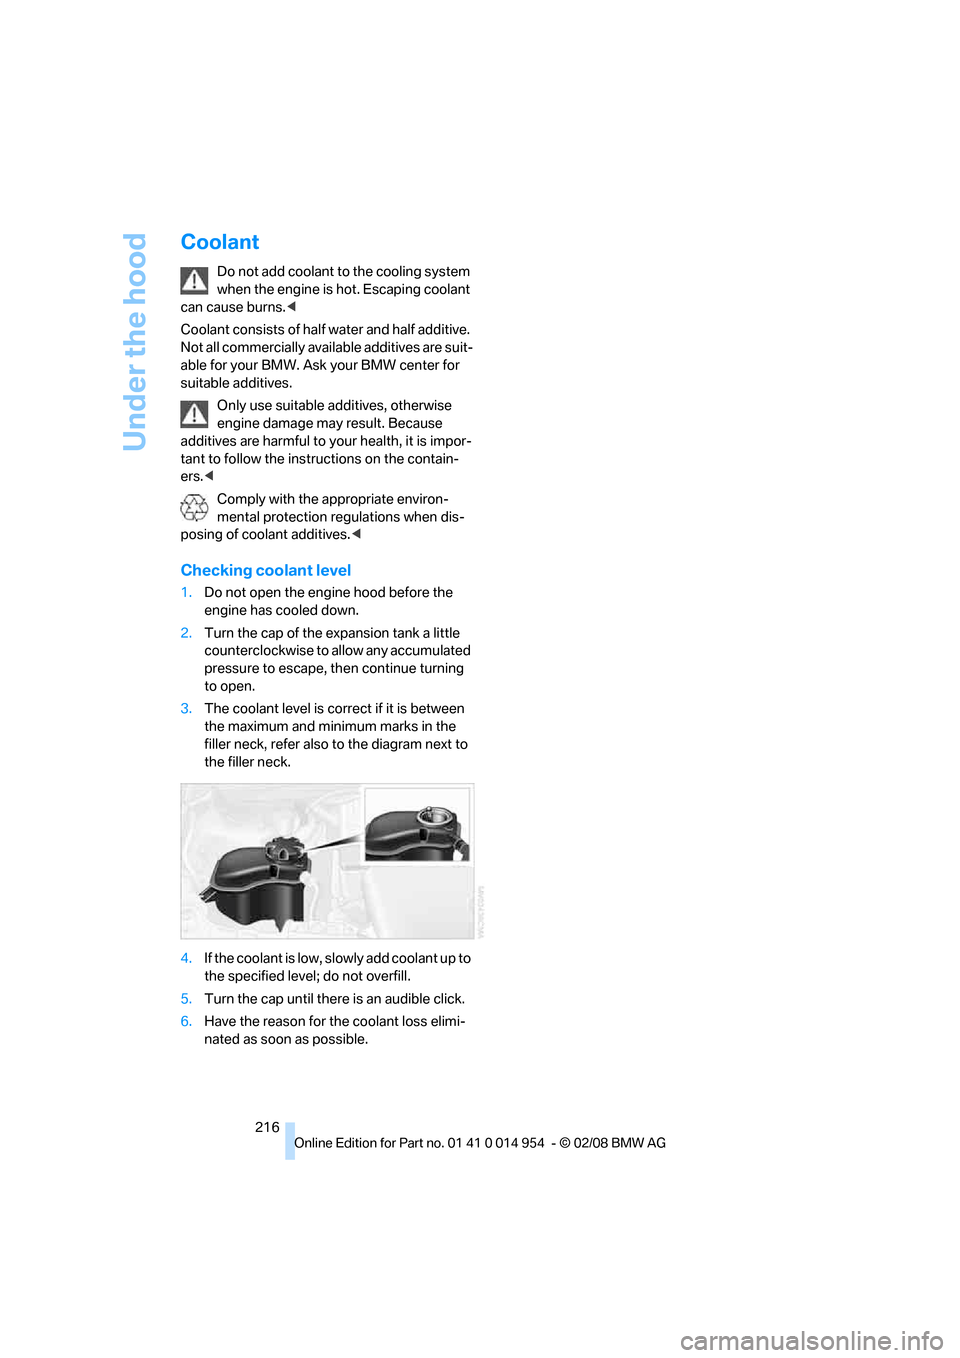 BMW 128I CONVERTIBLE 2008 E88 User Guide Under the hood
216
Coolant
Do not add coolant to the cooling system 
when the engine is hot. Escaping coolant 
can cause burns.<
Coolant consists of half water and half additive. 
Not all commercially